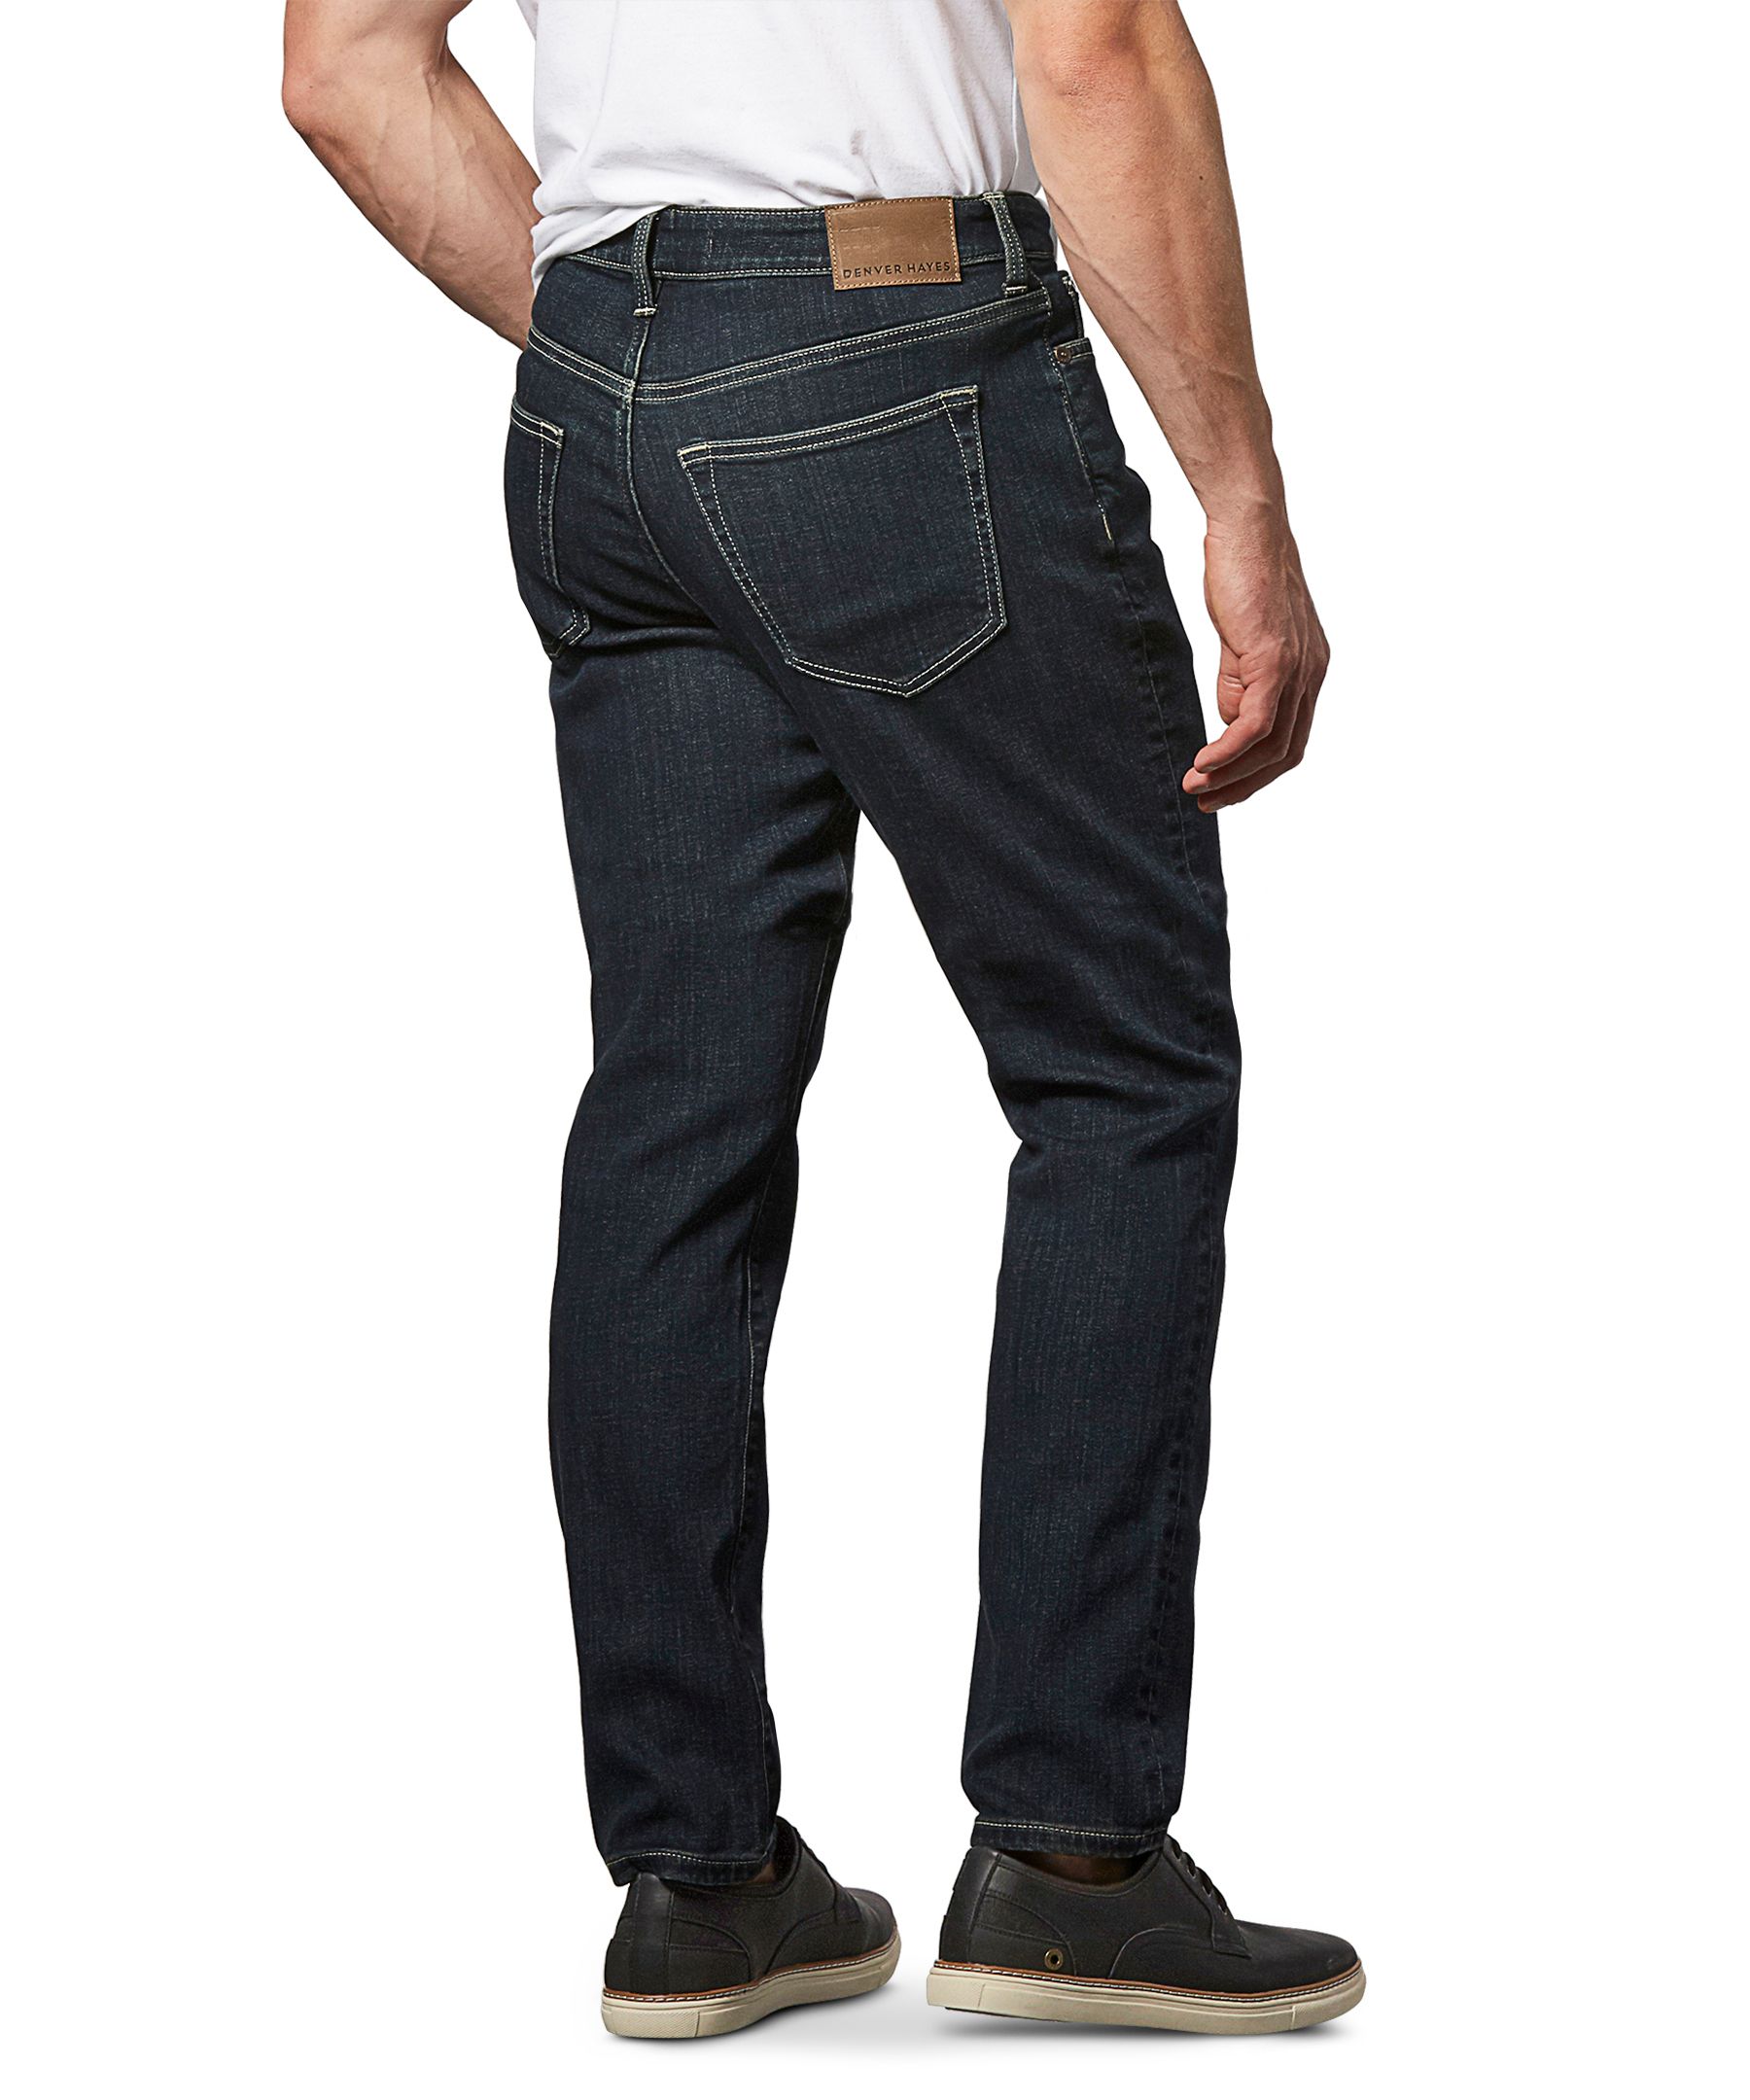 Denver Hayes Men's Flextech Relaxed Fit Tapered Leg Stretch Jeans